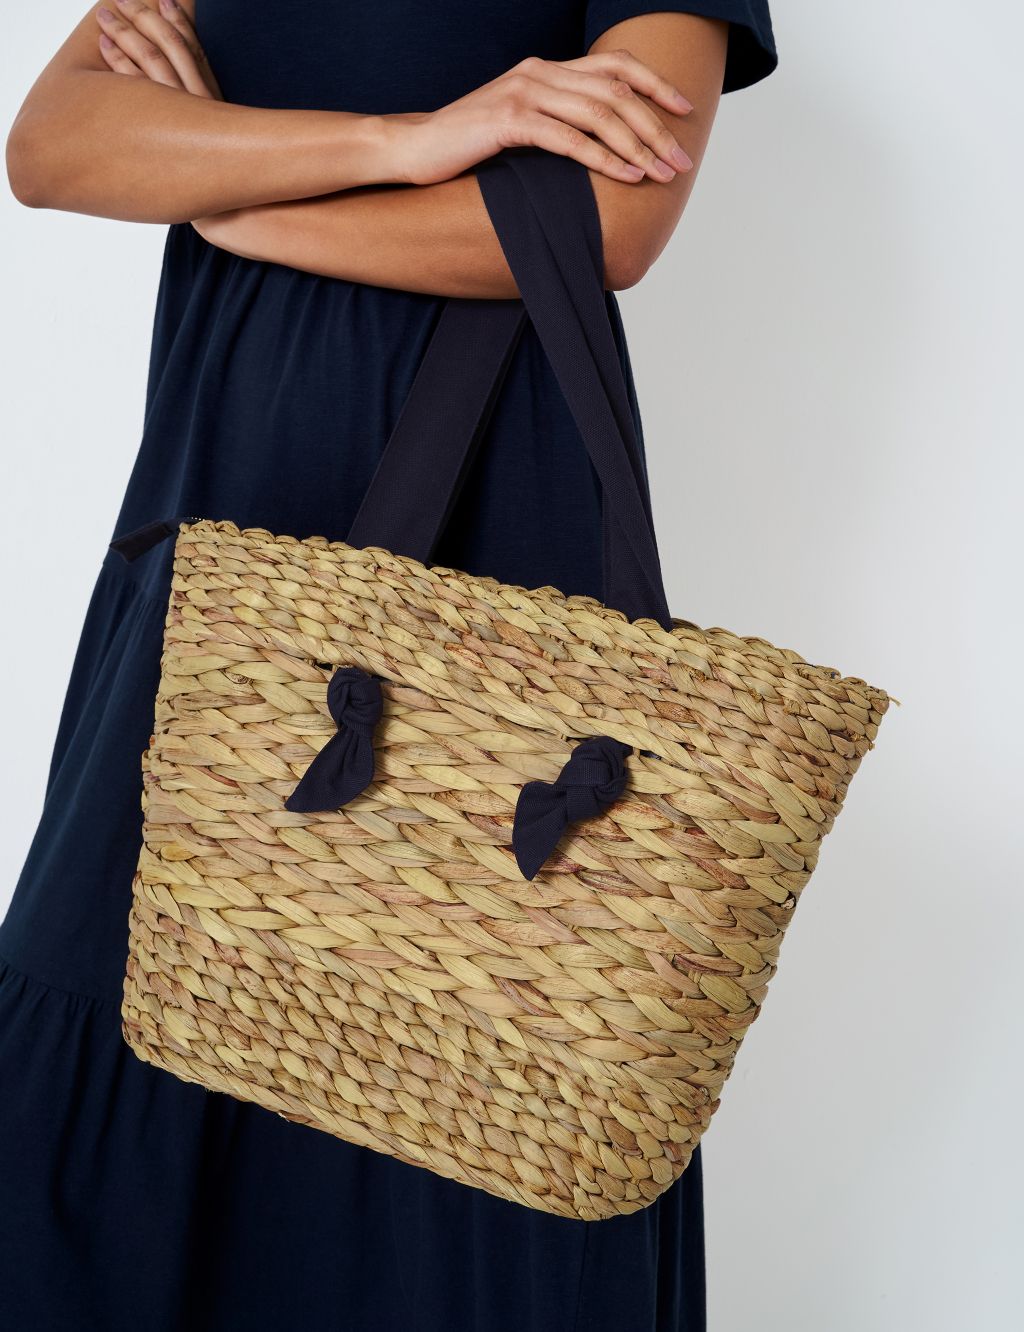 Straw Woven Tote Bag image 1